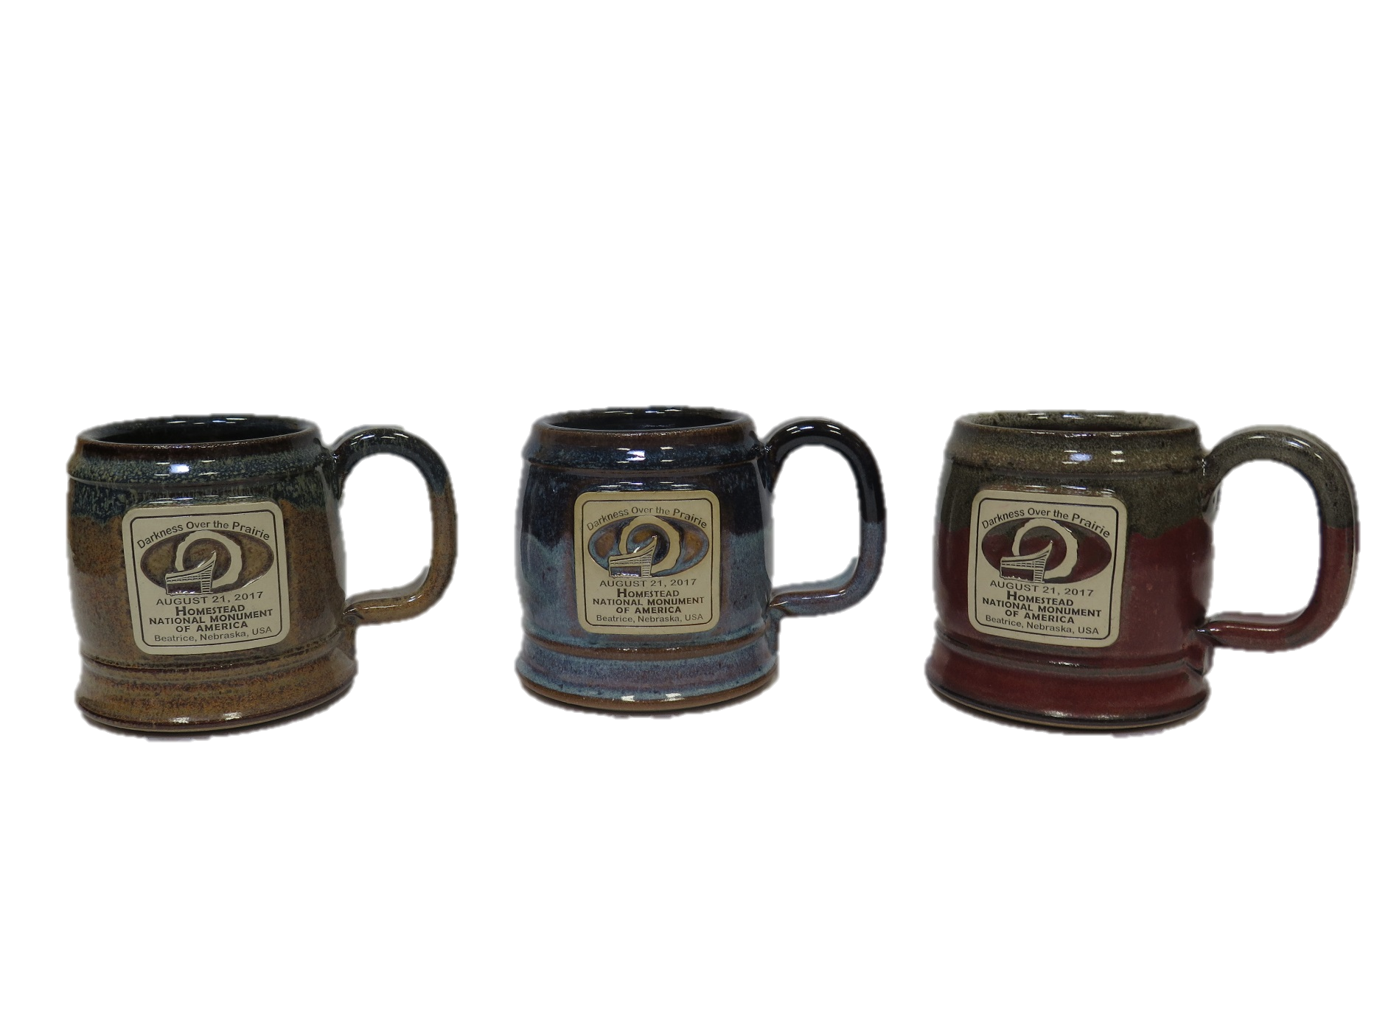 Shows three styles of mugs with Darkness Over the Prairie Logo